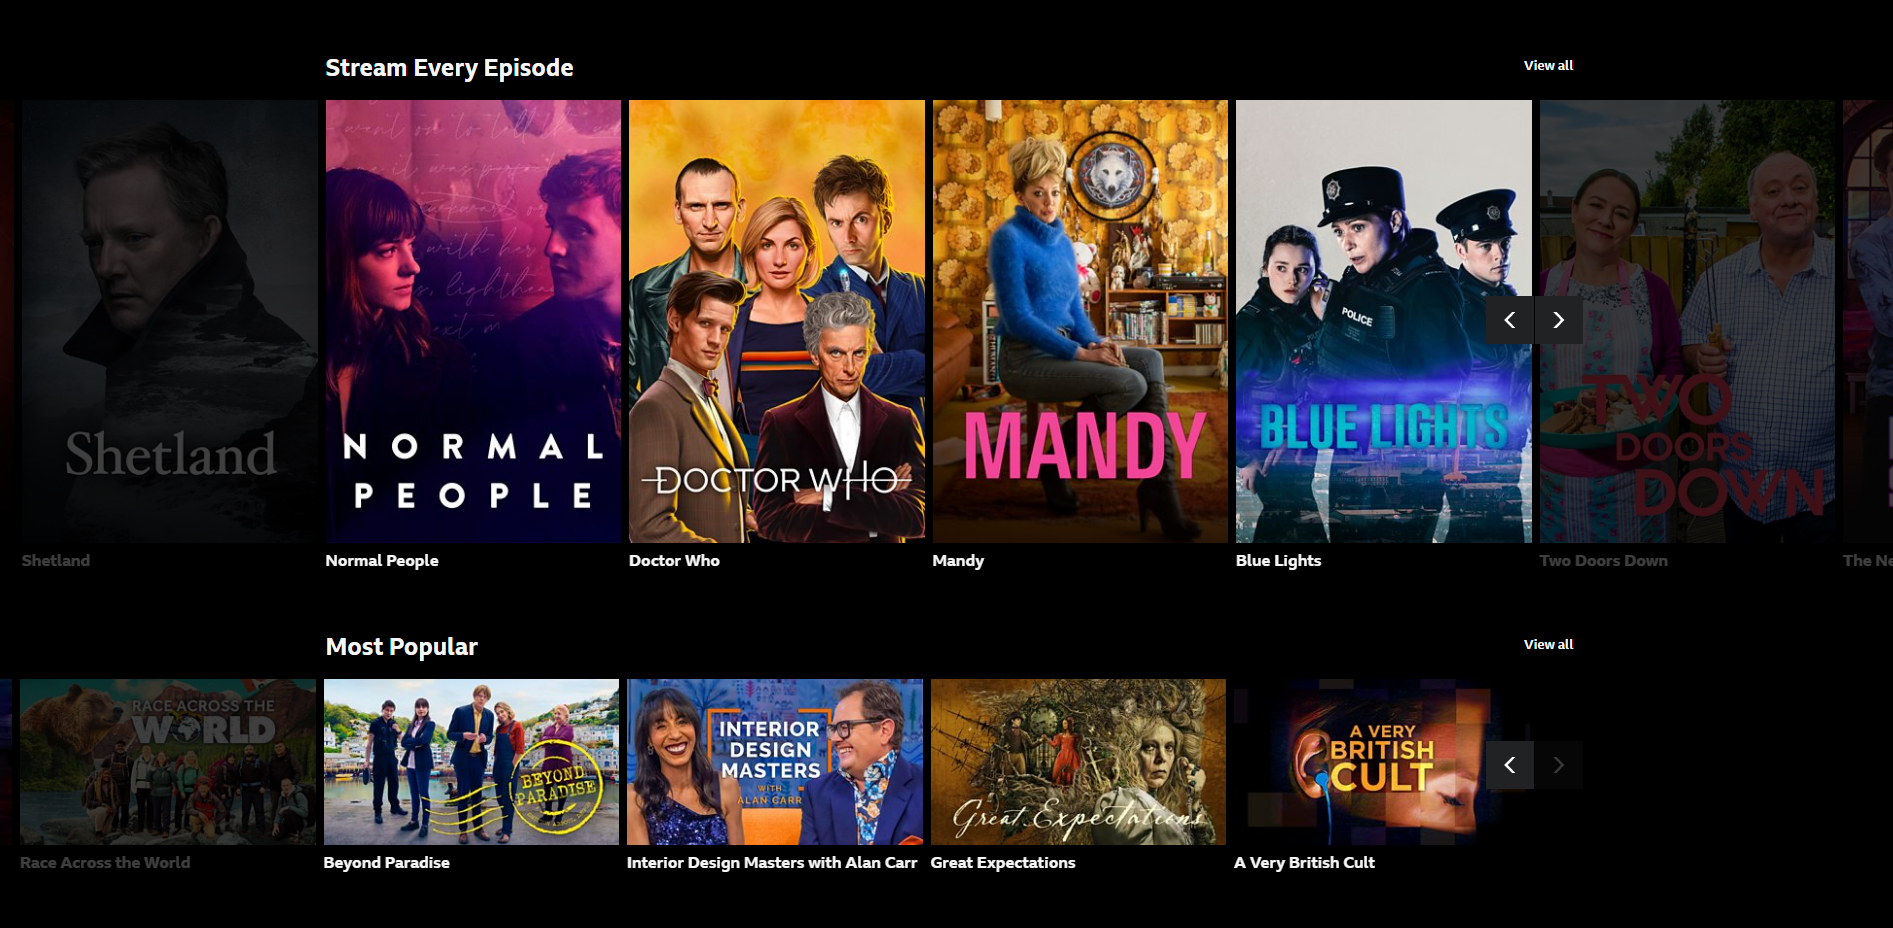 How to watch BBC iPlayer in USA (or any other country) with a VPN: Go to BBC iPlayer with a new UK IP address